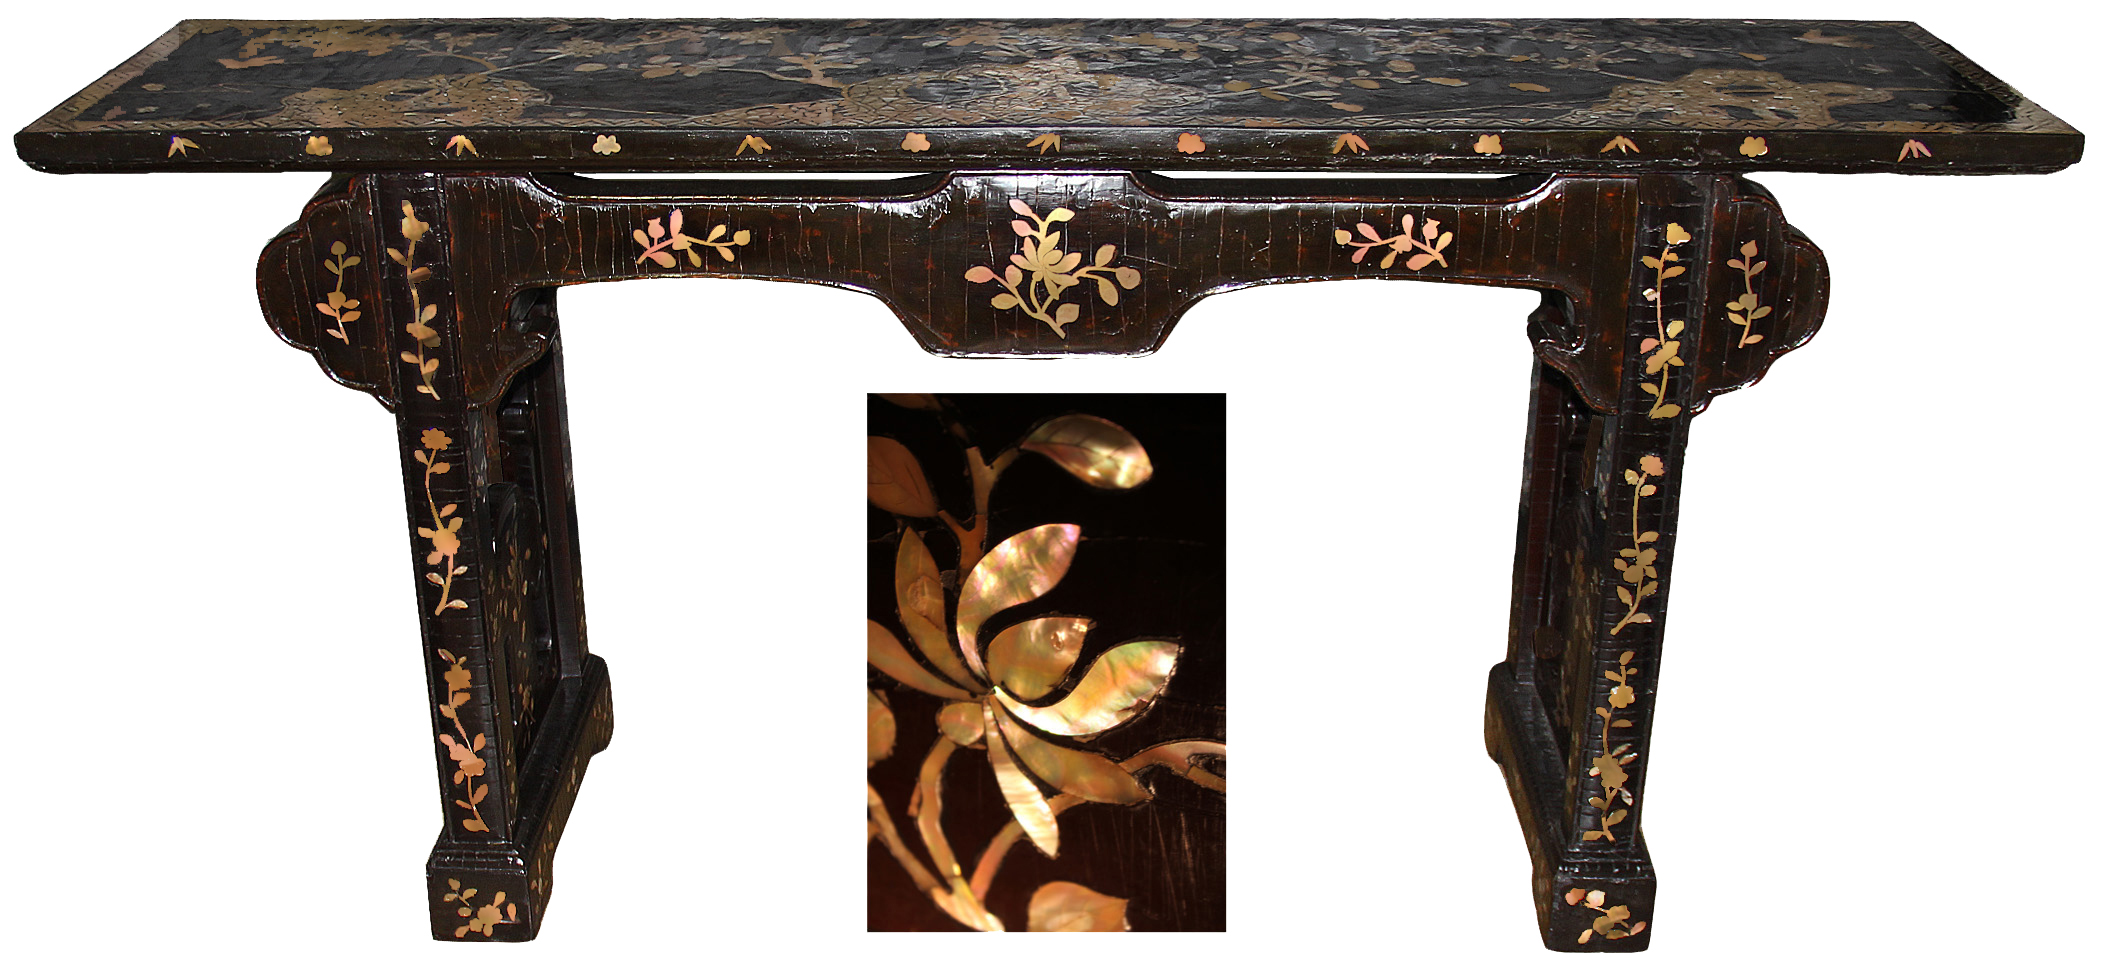 A Fine Late 17th Century (Post Manchu Invasion by China) Exuberantly Colorful Qing Dynasty Black Lacquer and Abalone Inlaid Altar (or Sofa) Table No. 4597